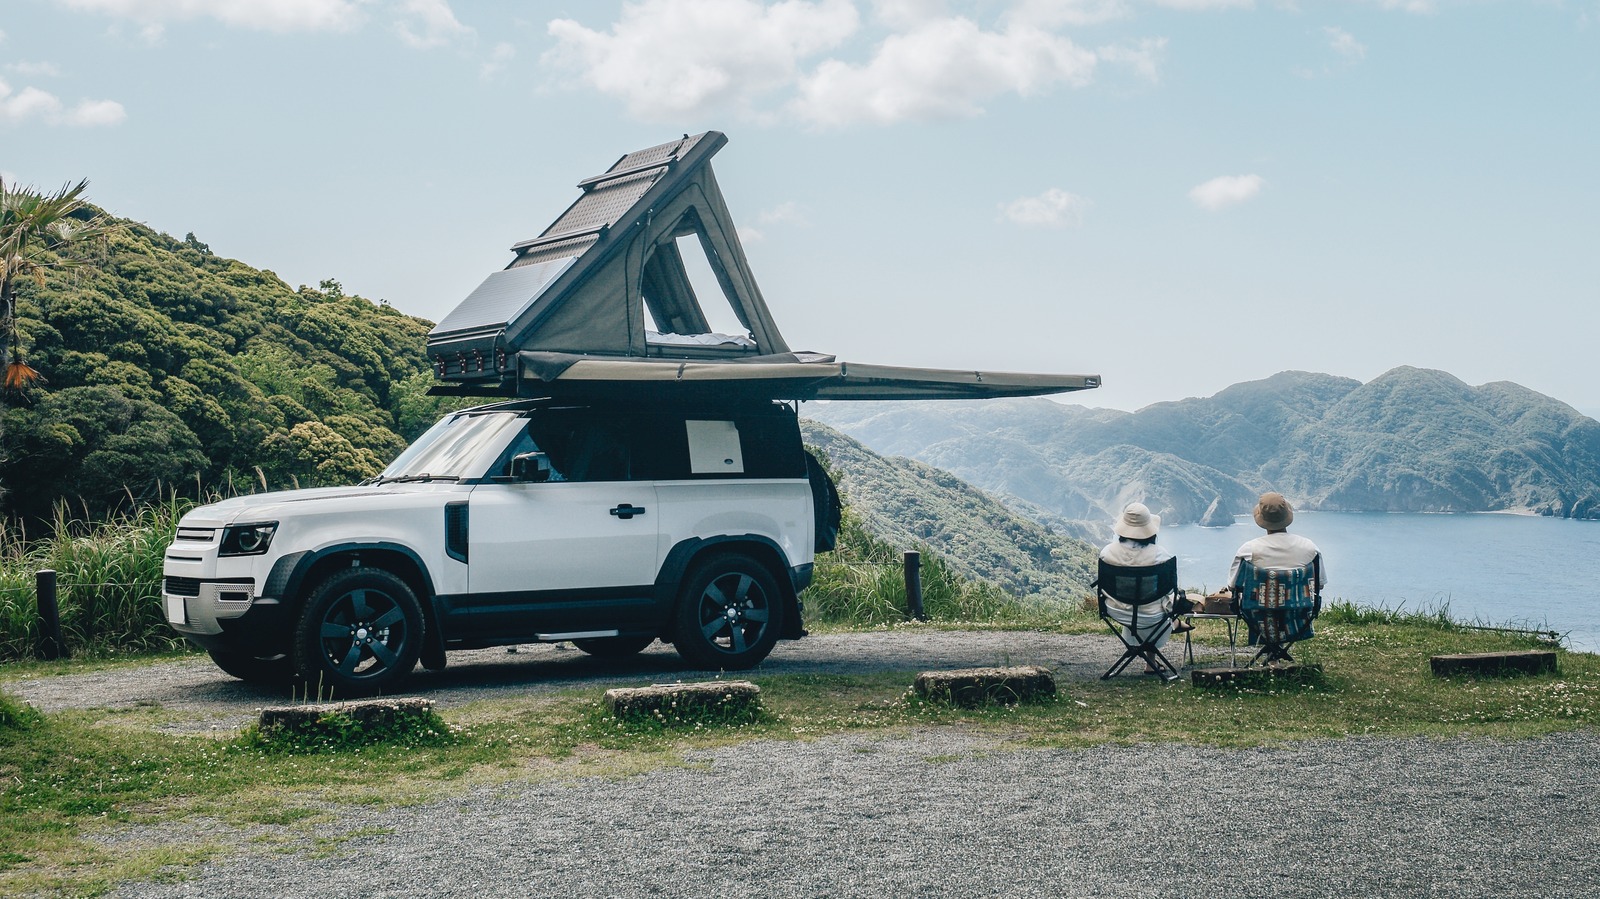 Overlanding Explained: Everything You Need To Know About Off-Road Camping